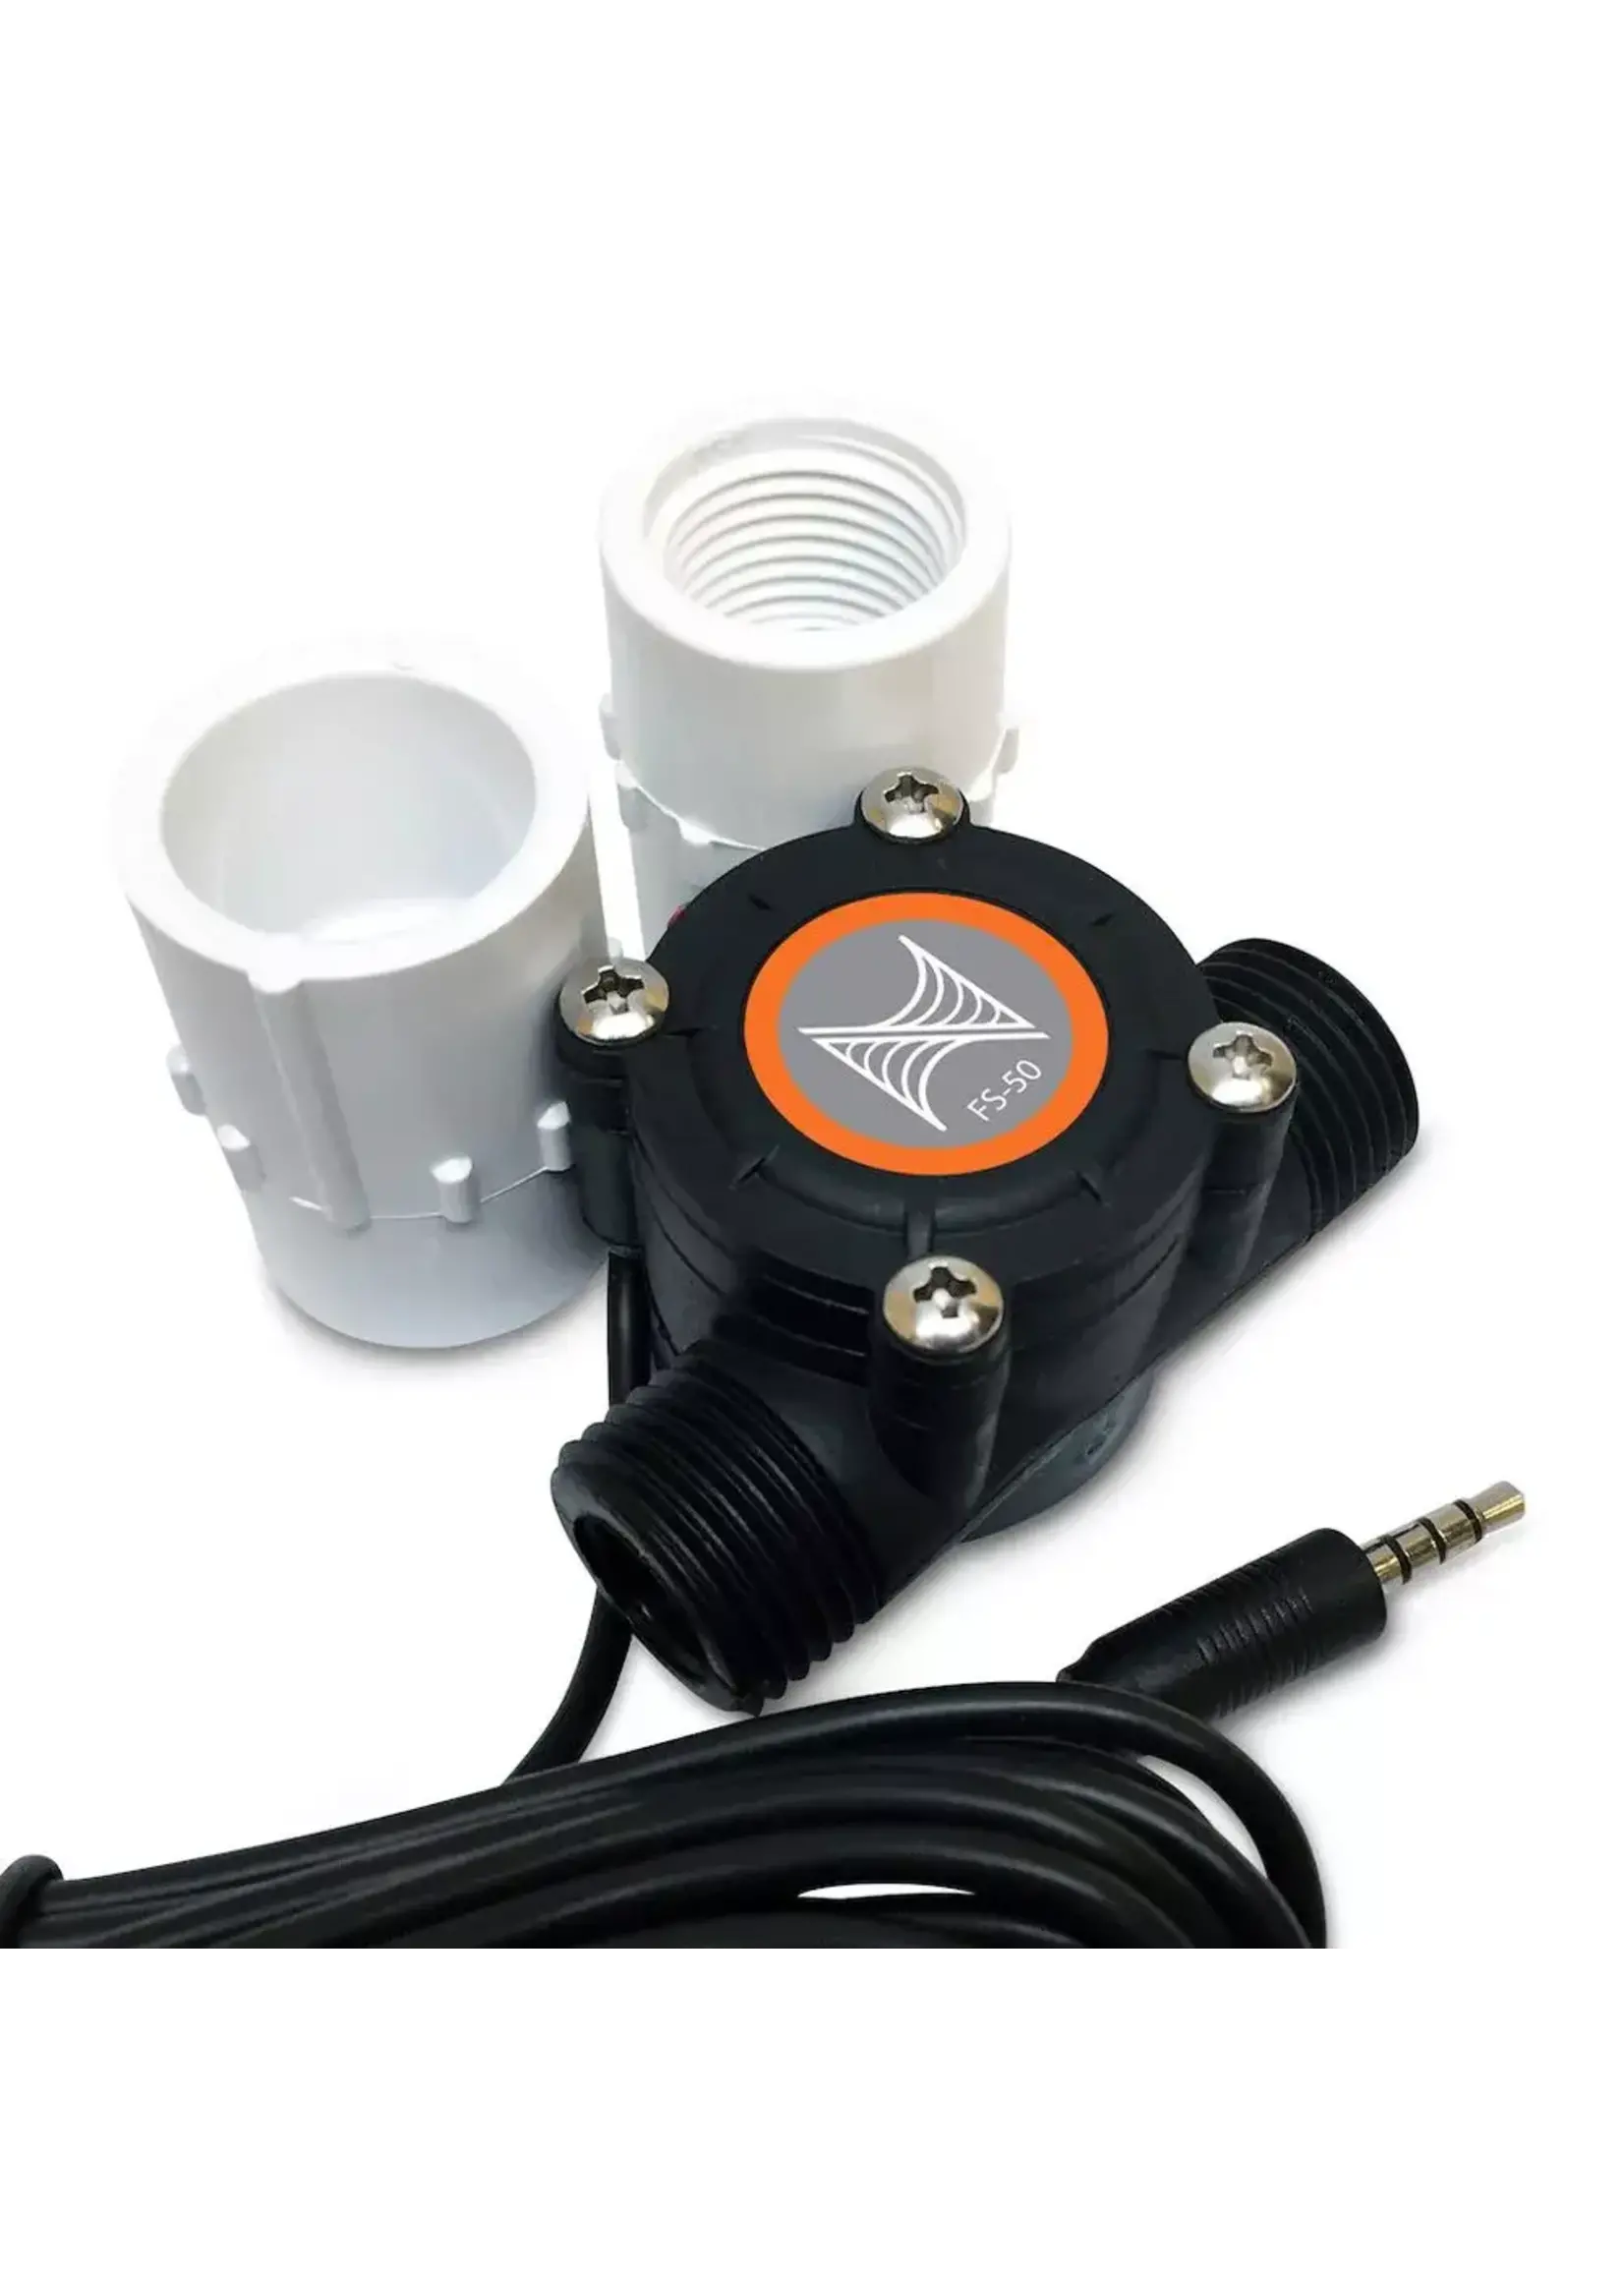 Neptune System FLOW SENSOR 0.5" WITH ADAPTERS